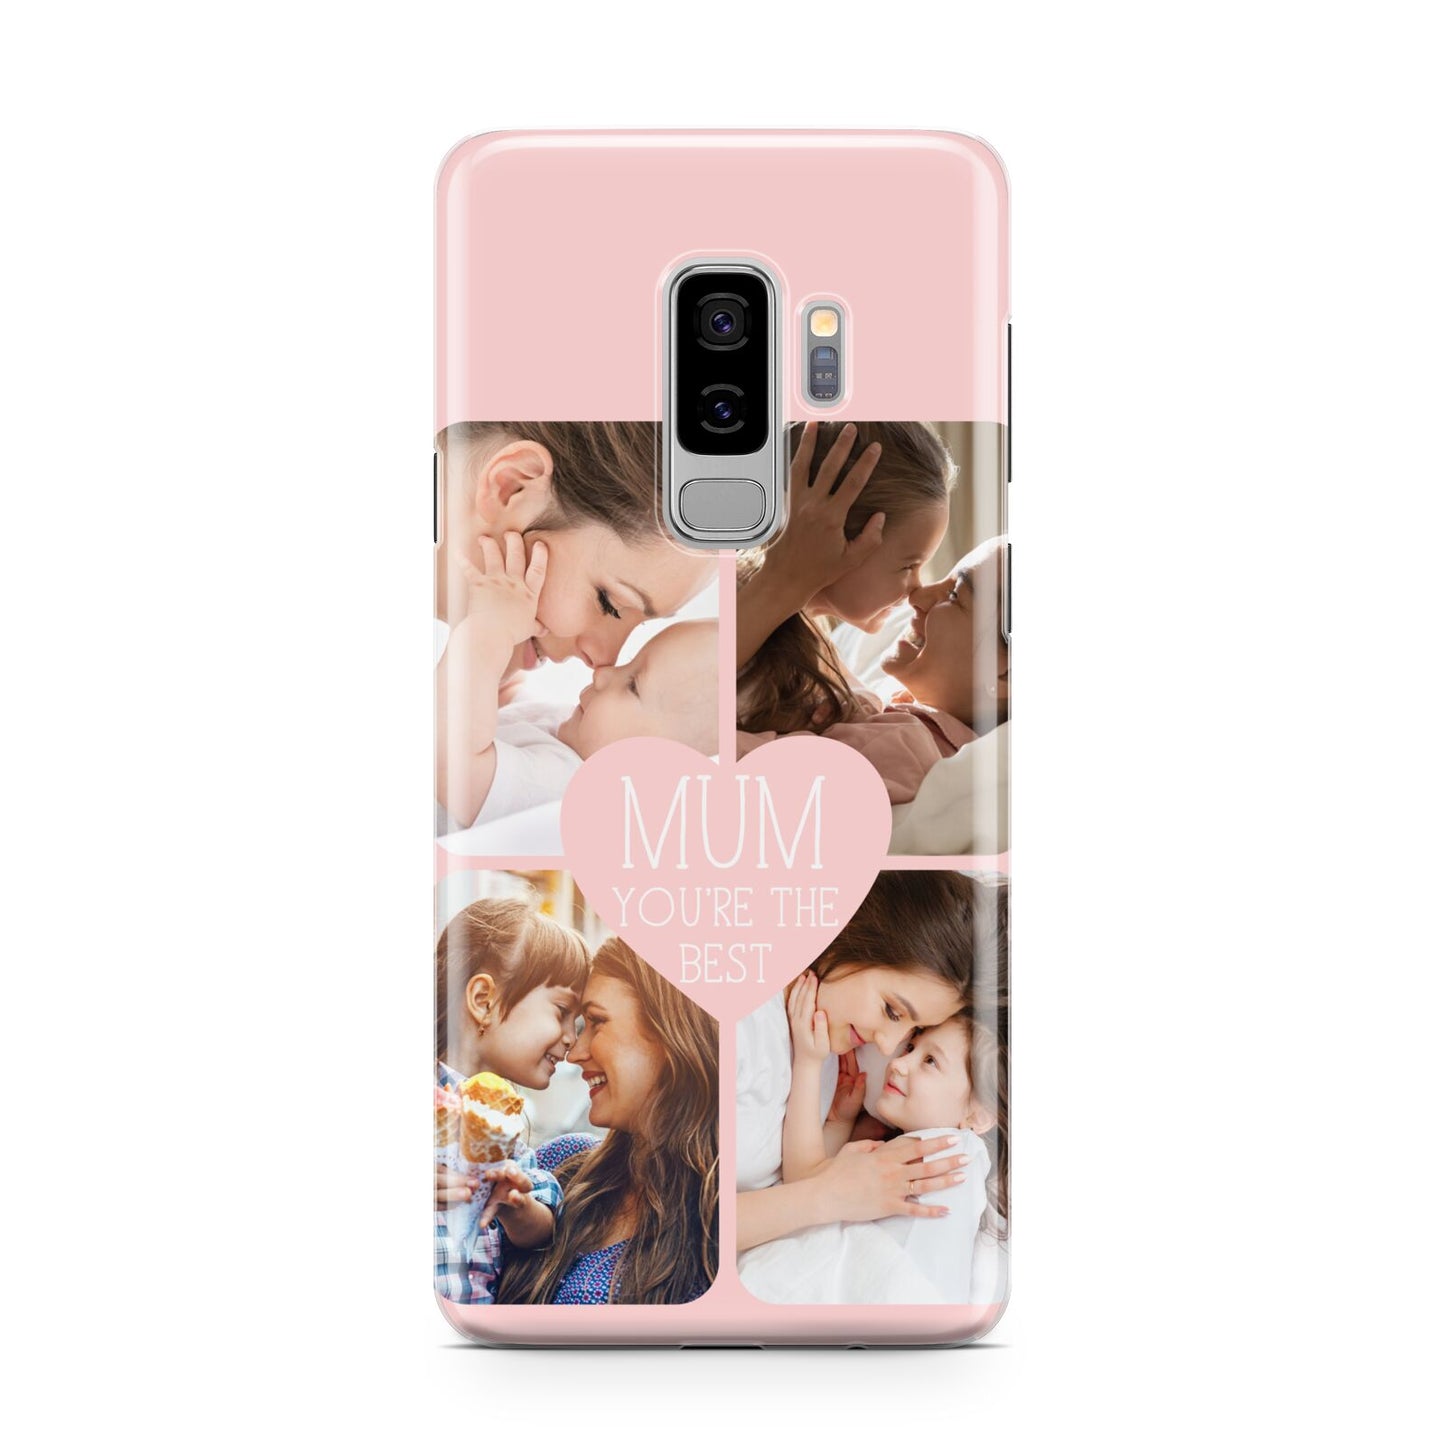 Mothers Day Four Photo Upload Samsung Galaxy S9 Plus Case on Silver phone